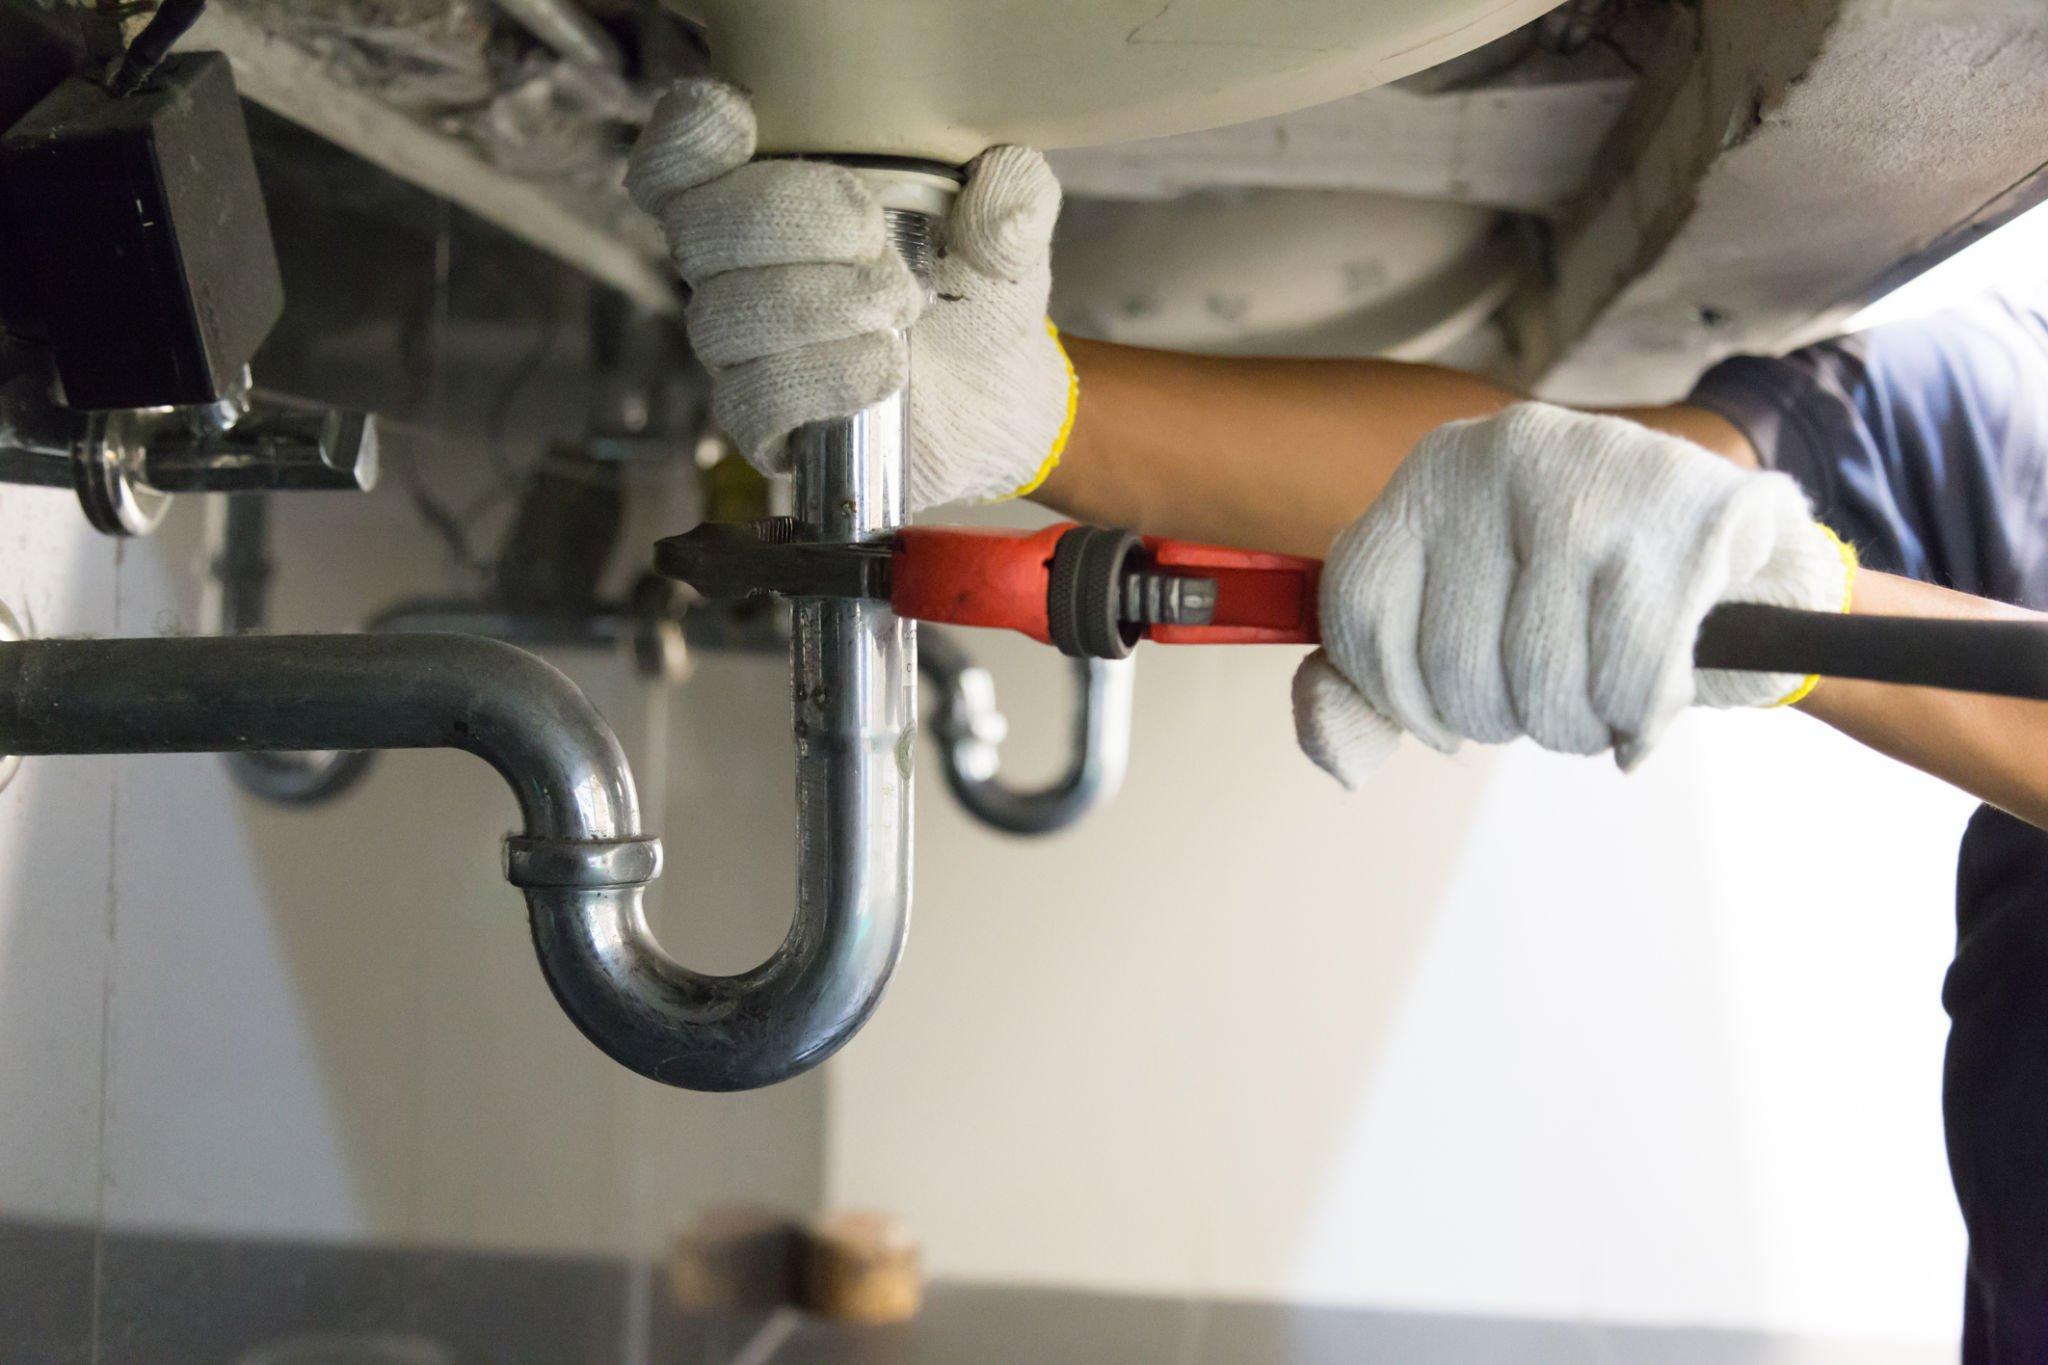 Plumber San Jose: Find a Reliable Plumbing Company Today